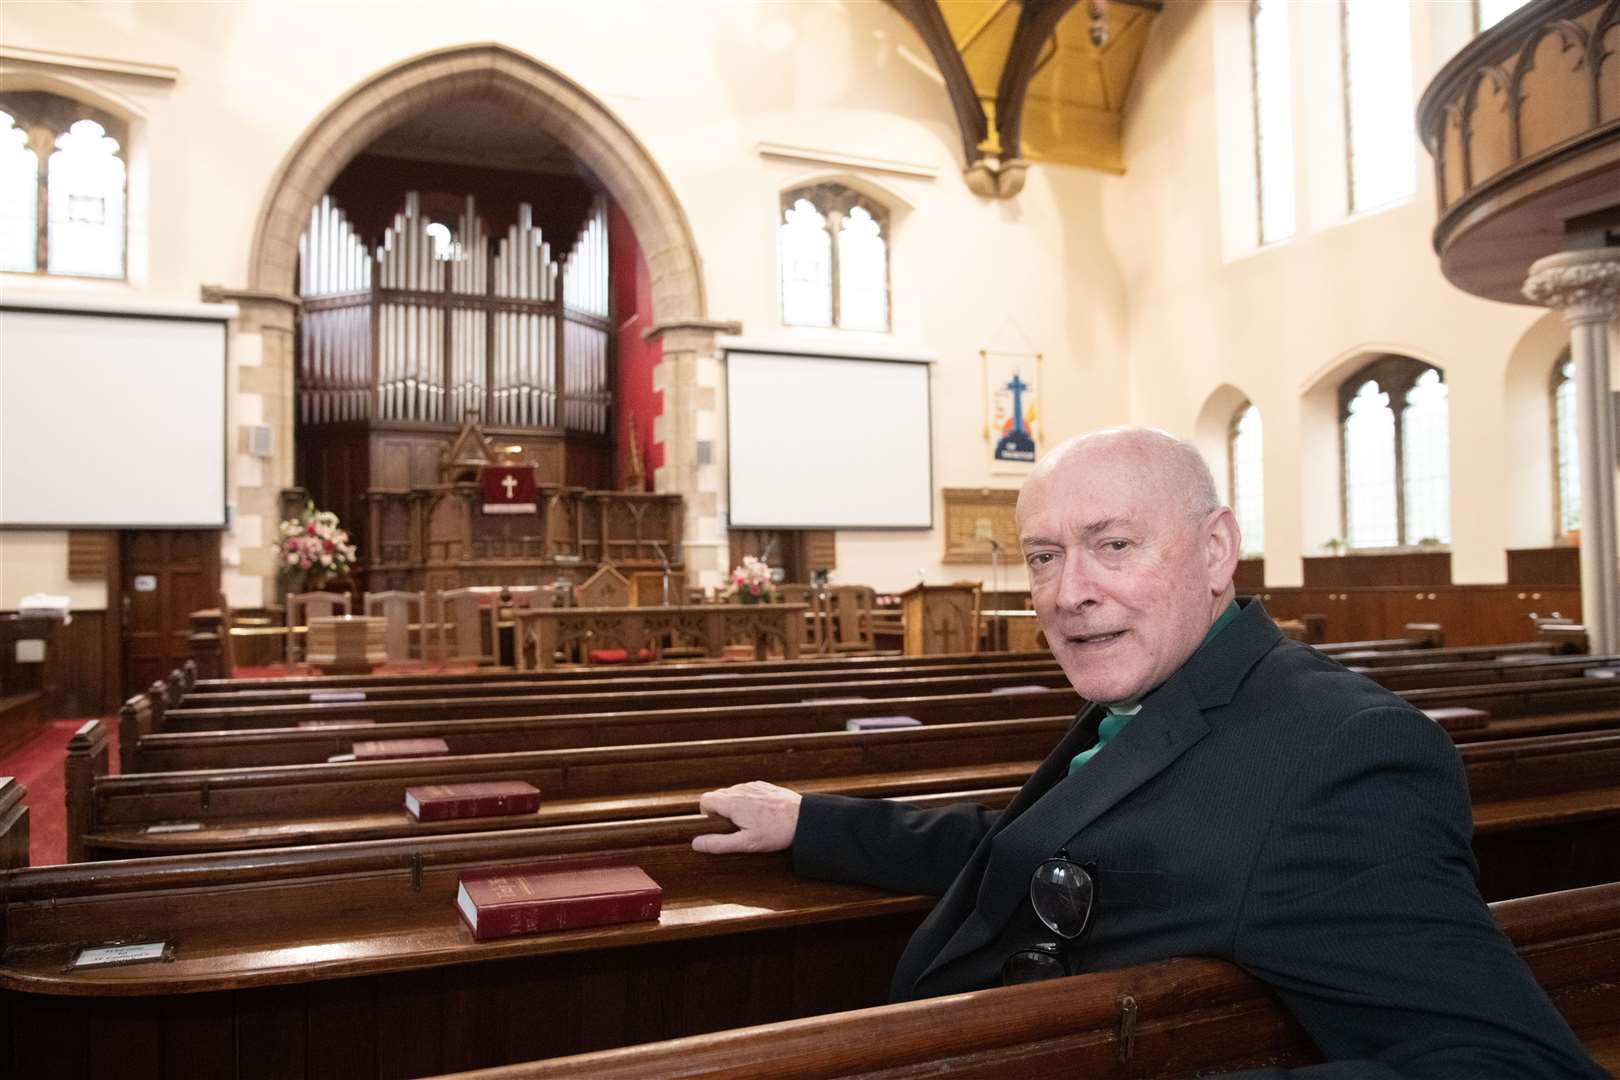 Rev Prentice was in joint charge of St Leonard’s Church, Rafford Church and St Michael’s Church in Dallas.